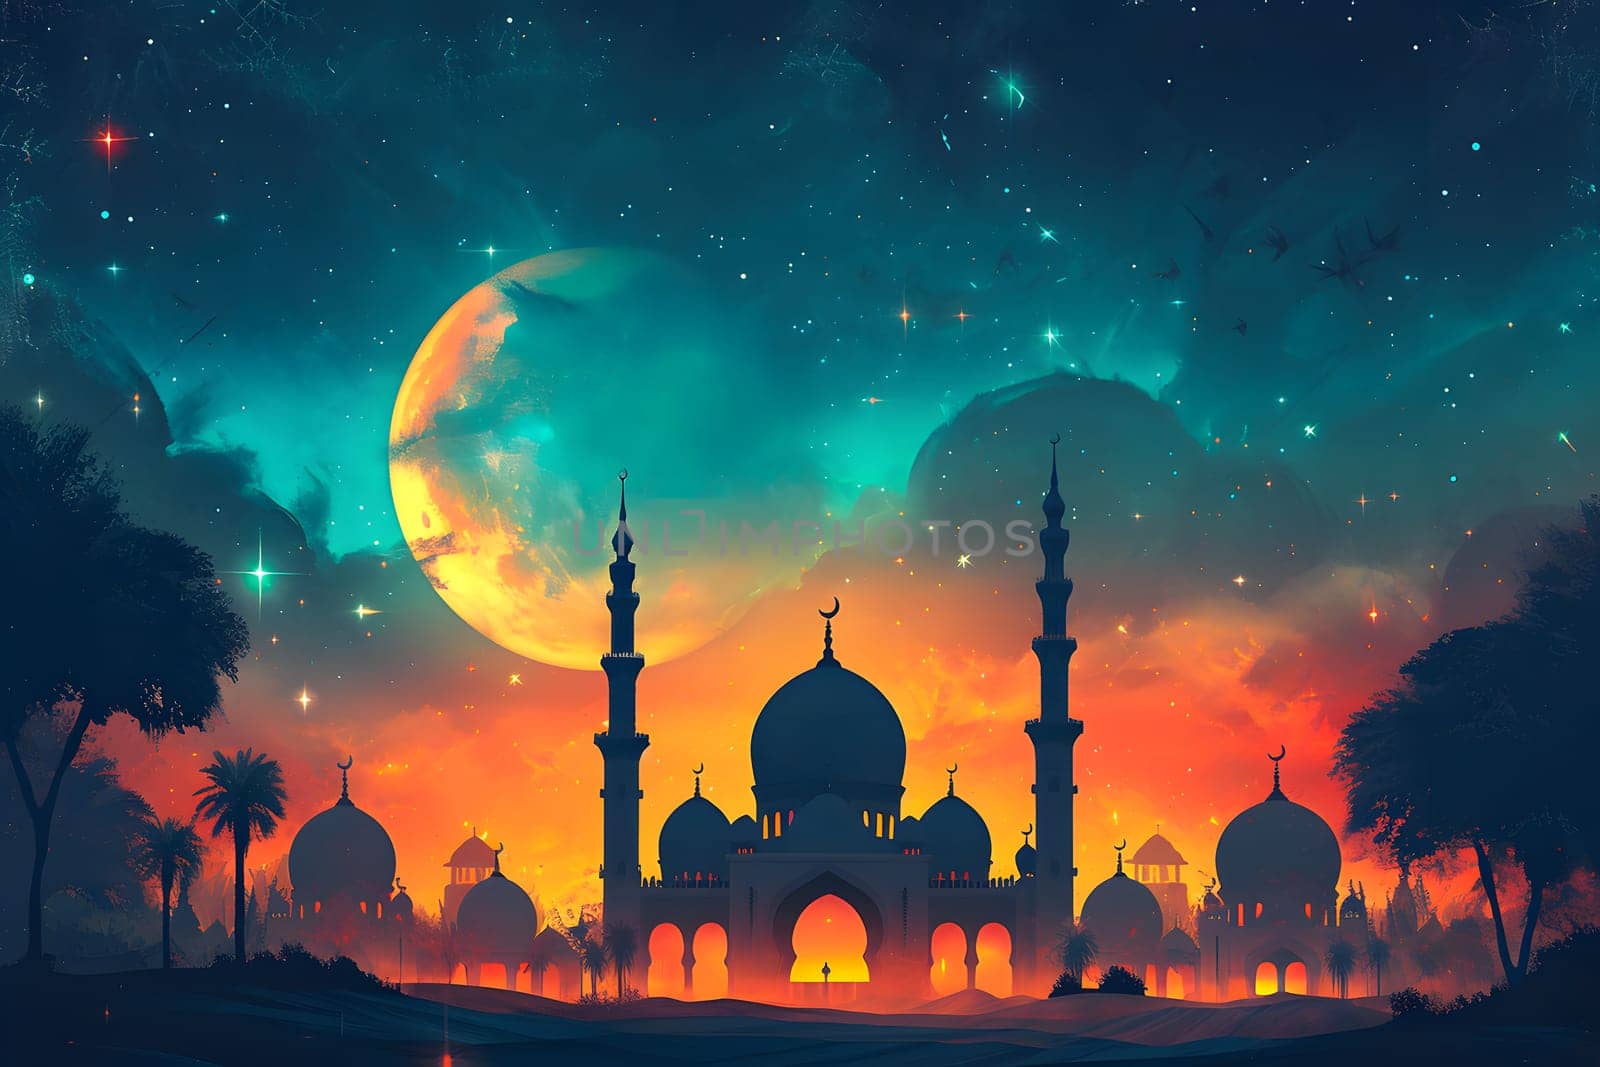 Ramadan mosque with night afterglow sky with crescent, neural network generated image by z1b